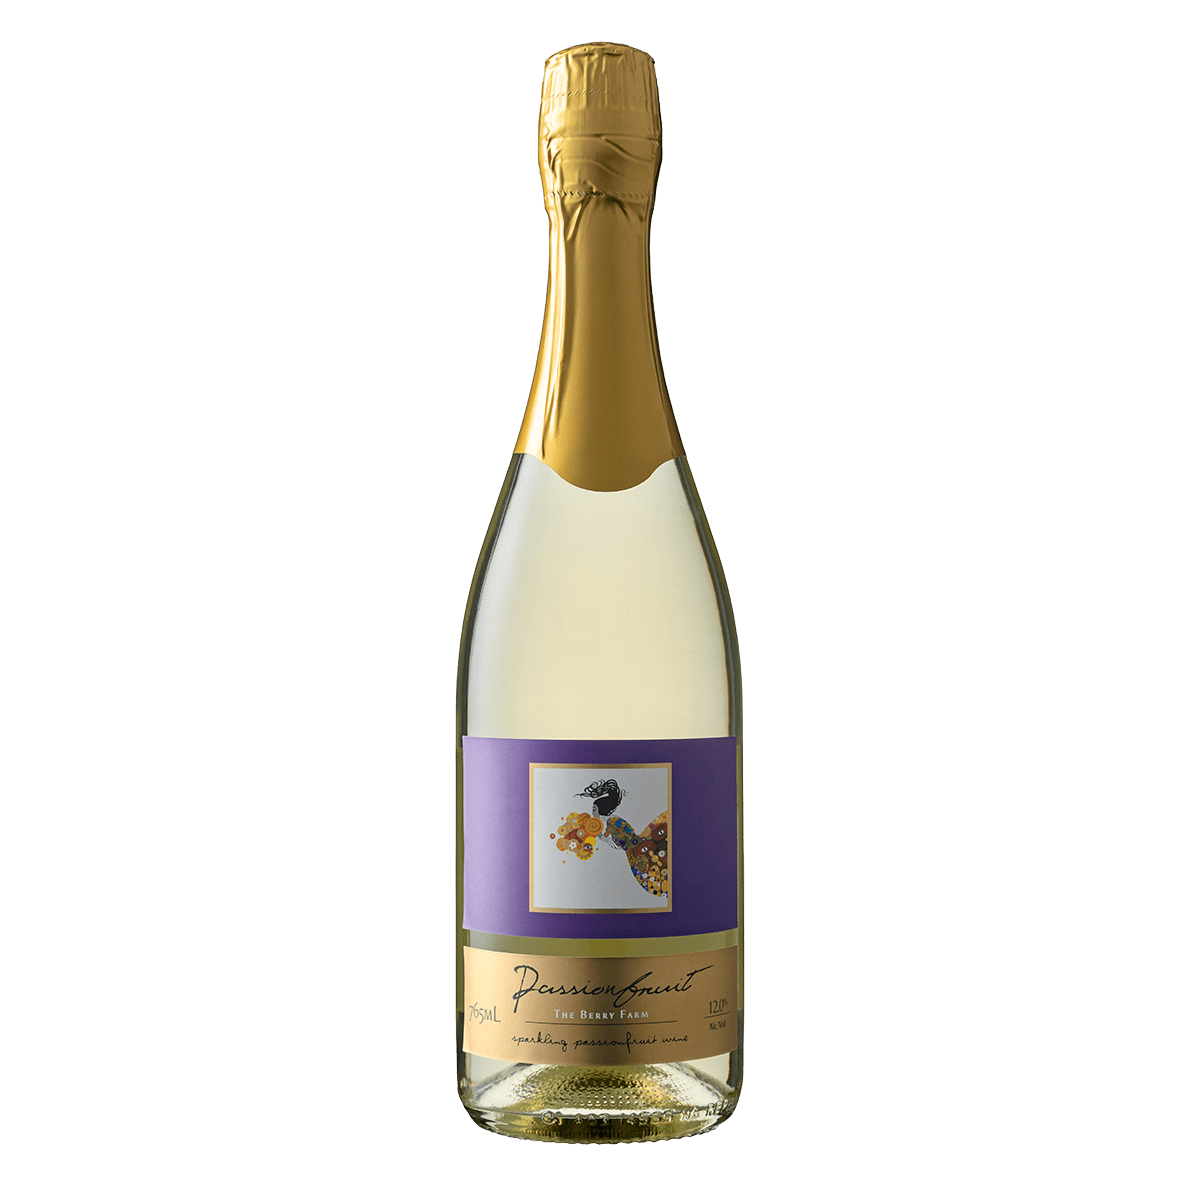 A bottle of Passionfruit Sparkling Wine